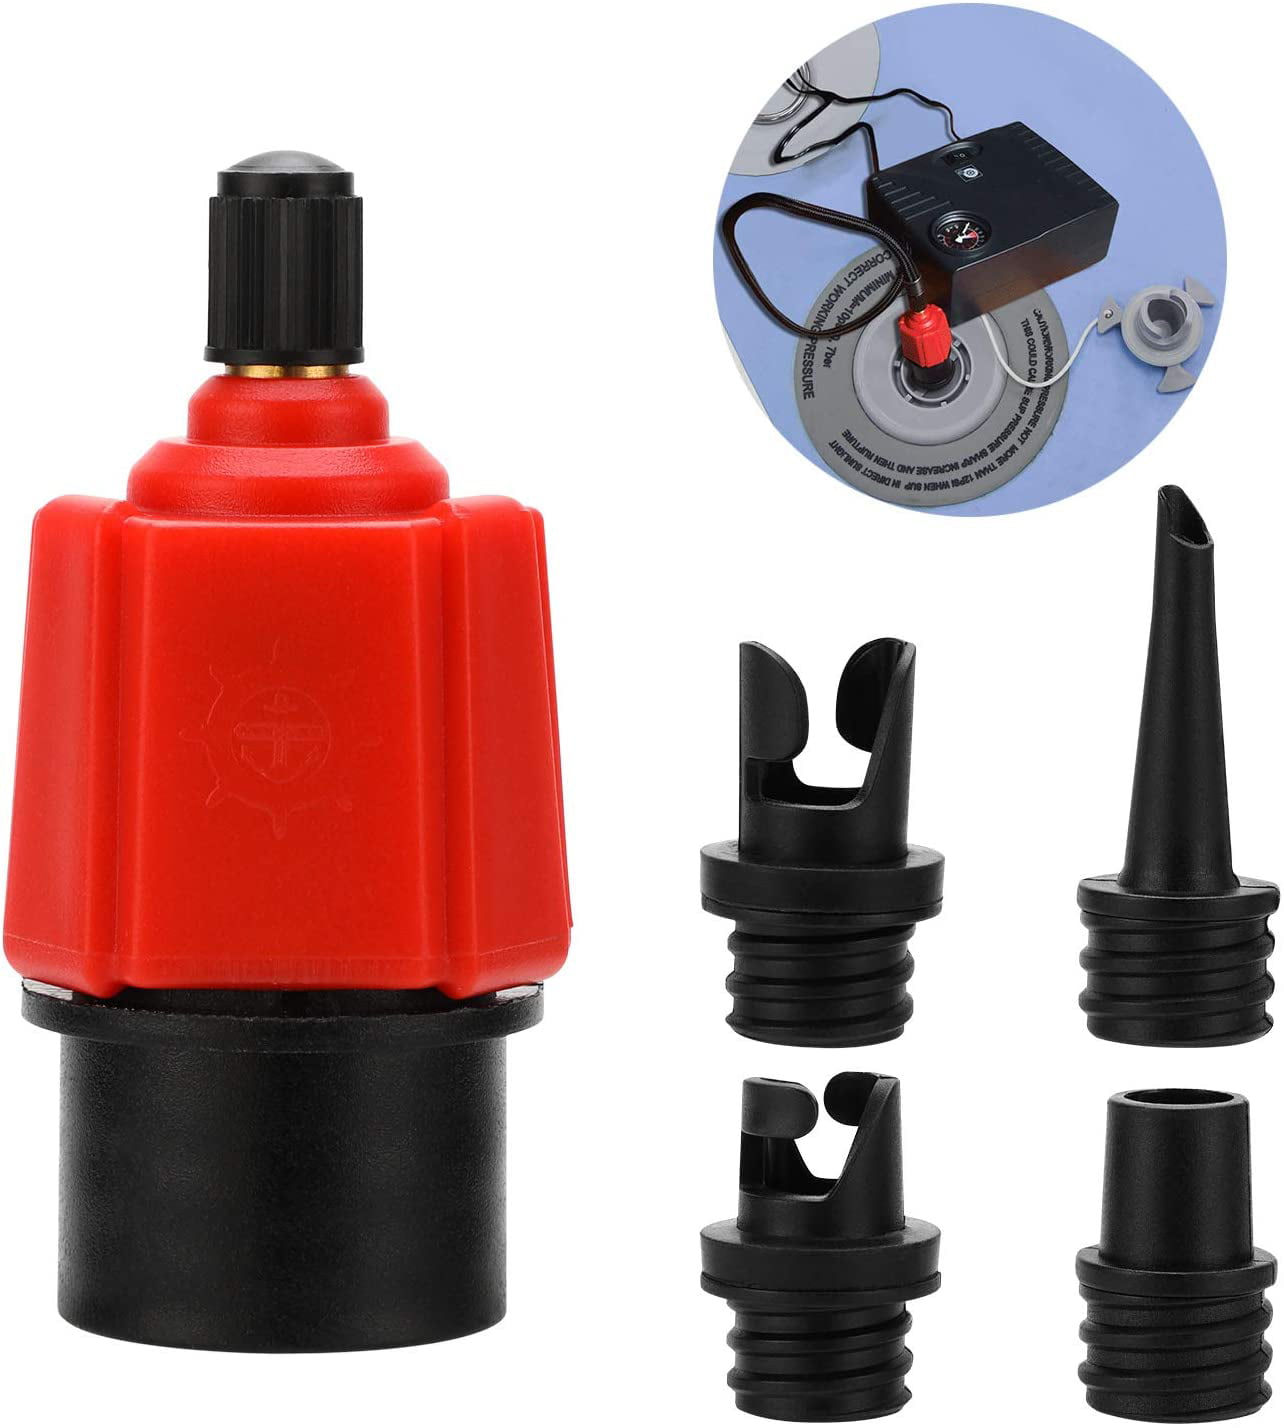 Inflatable SUP Pump Adaptor Air Compressor Valve Converter Multifunction SUP Valve Bike Pump Adapter w/ 4 Air Valve Nozzles for Inflatable Boat Stand Up Paddle Board Inflatable Bed